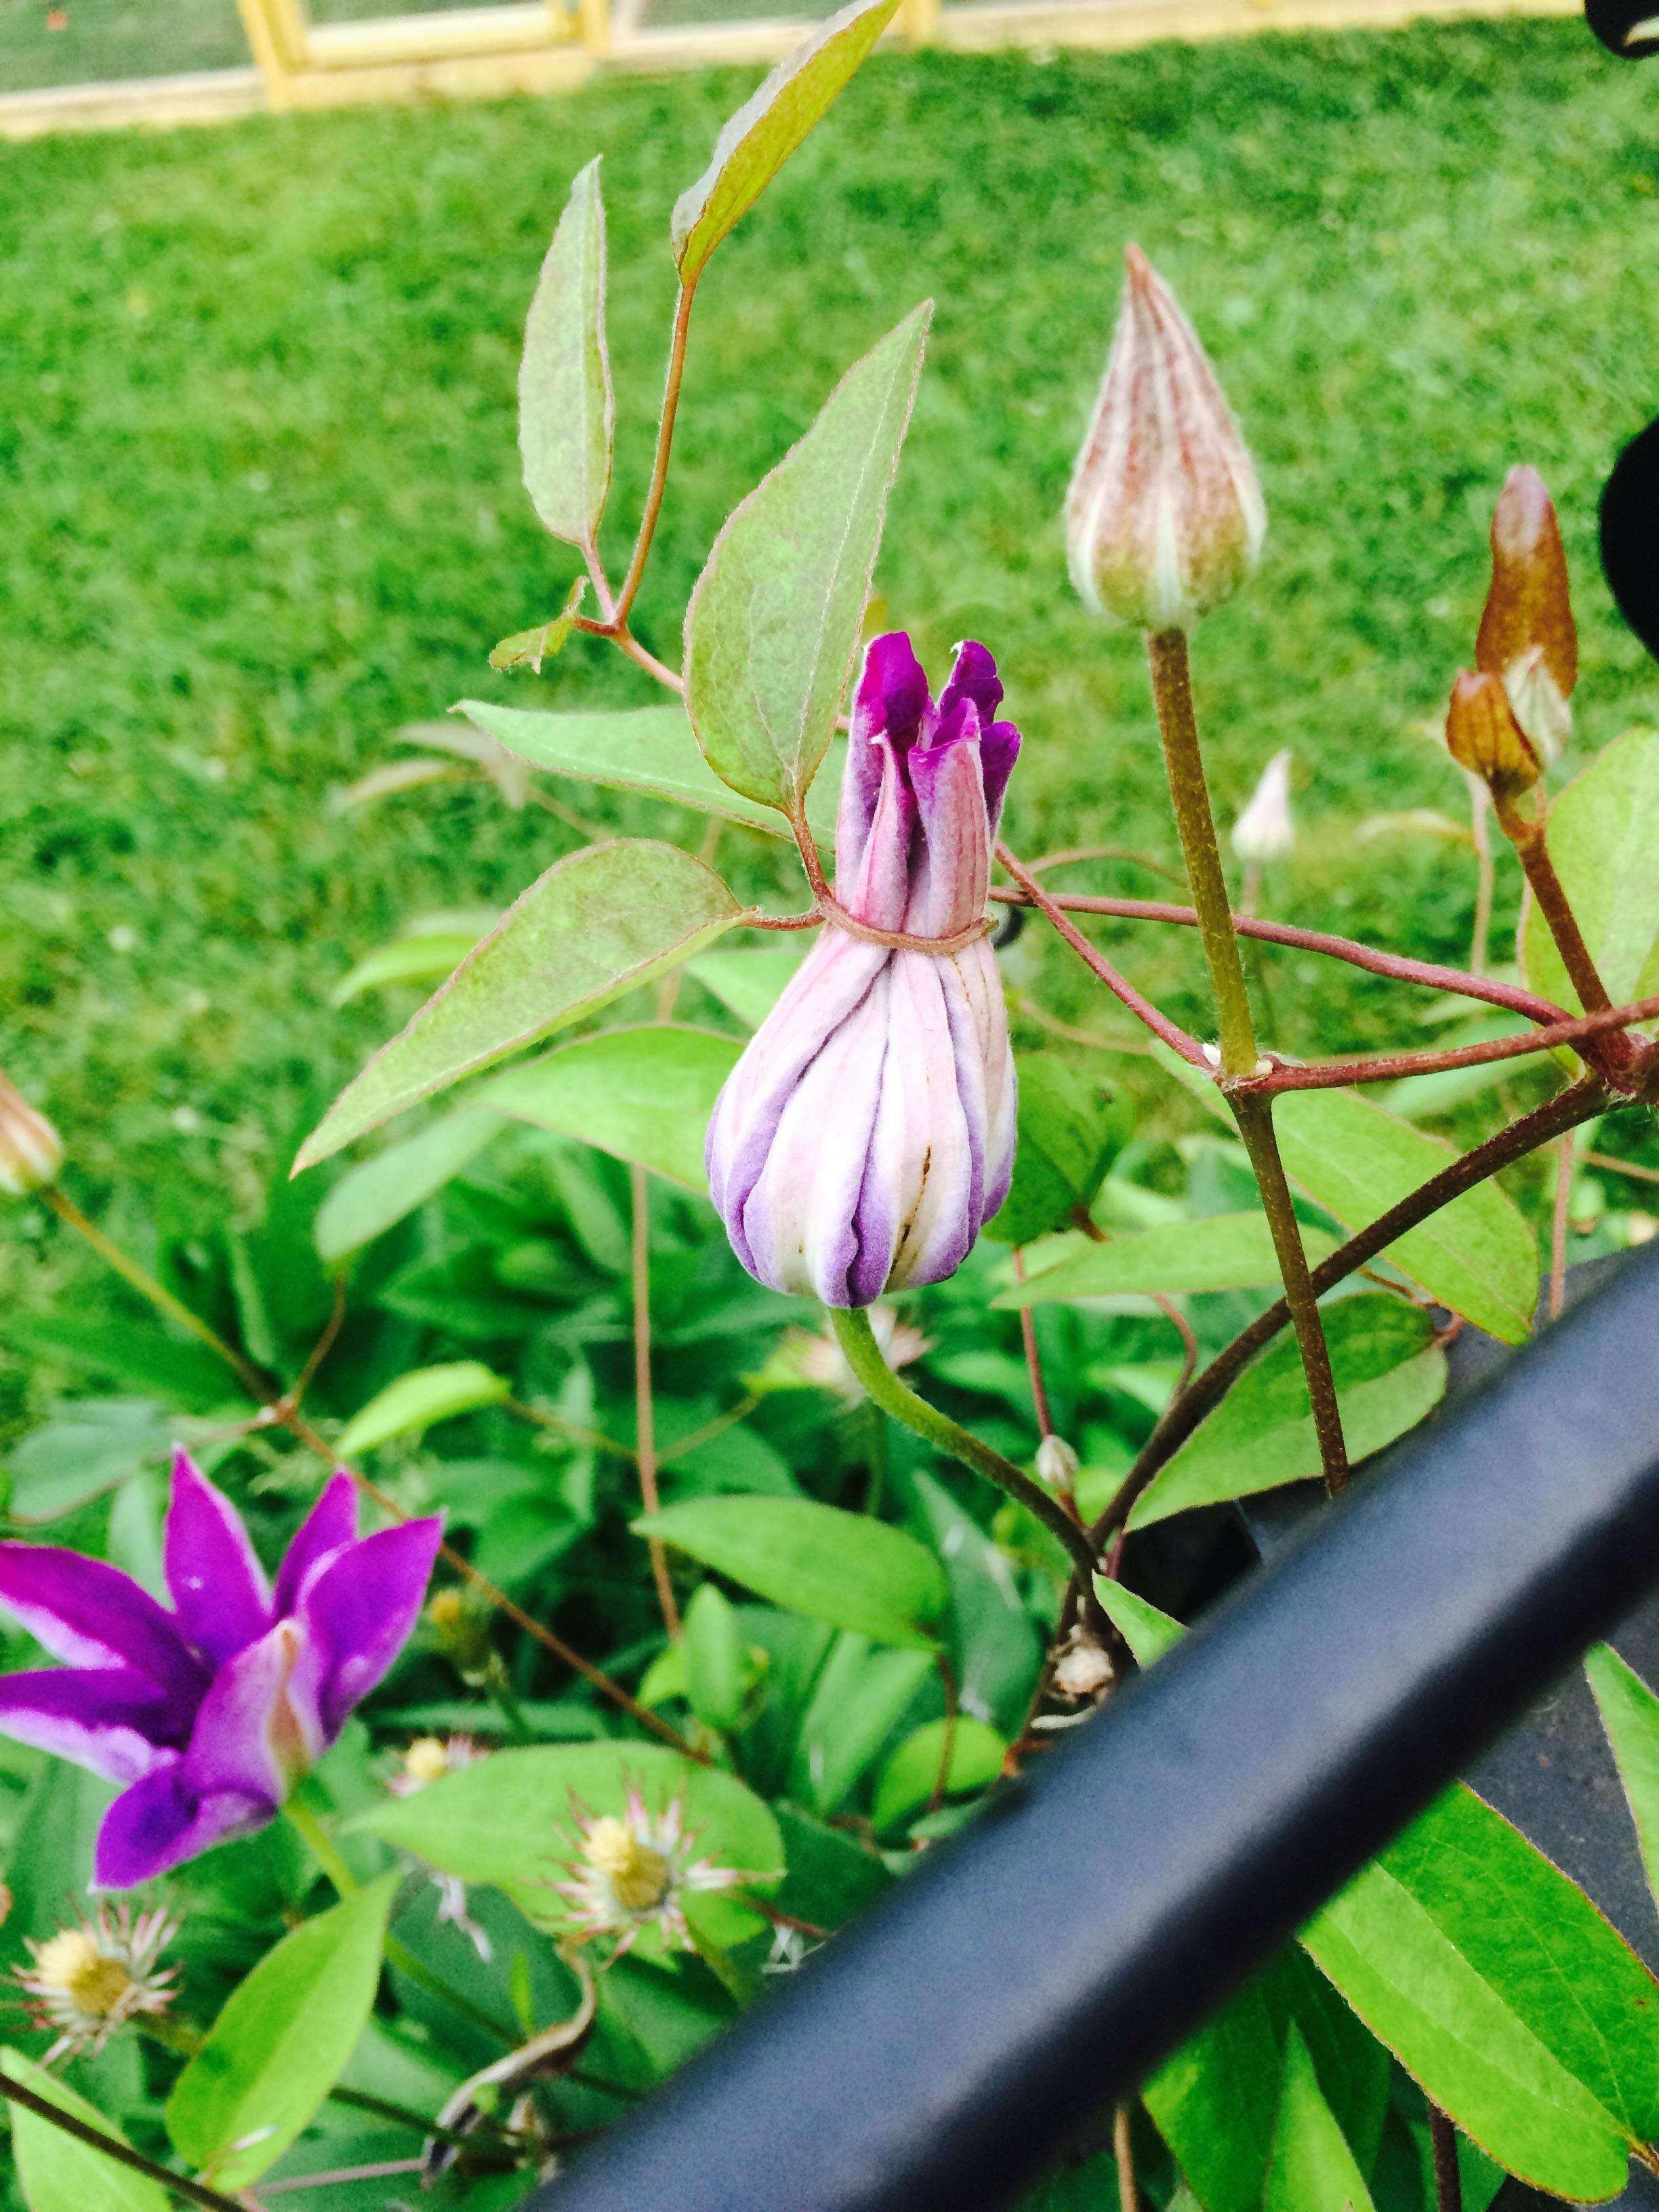 This plant is preventing itself from blooming. : mildlyinteresting